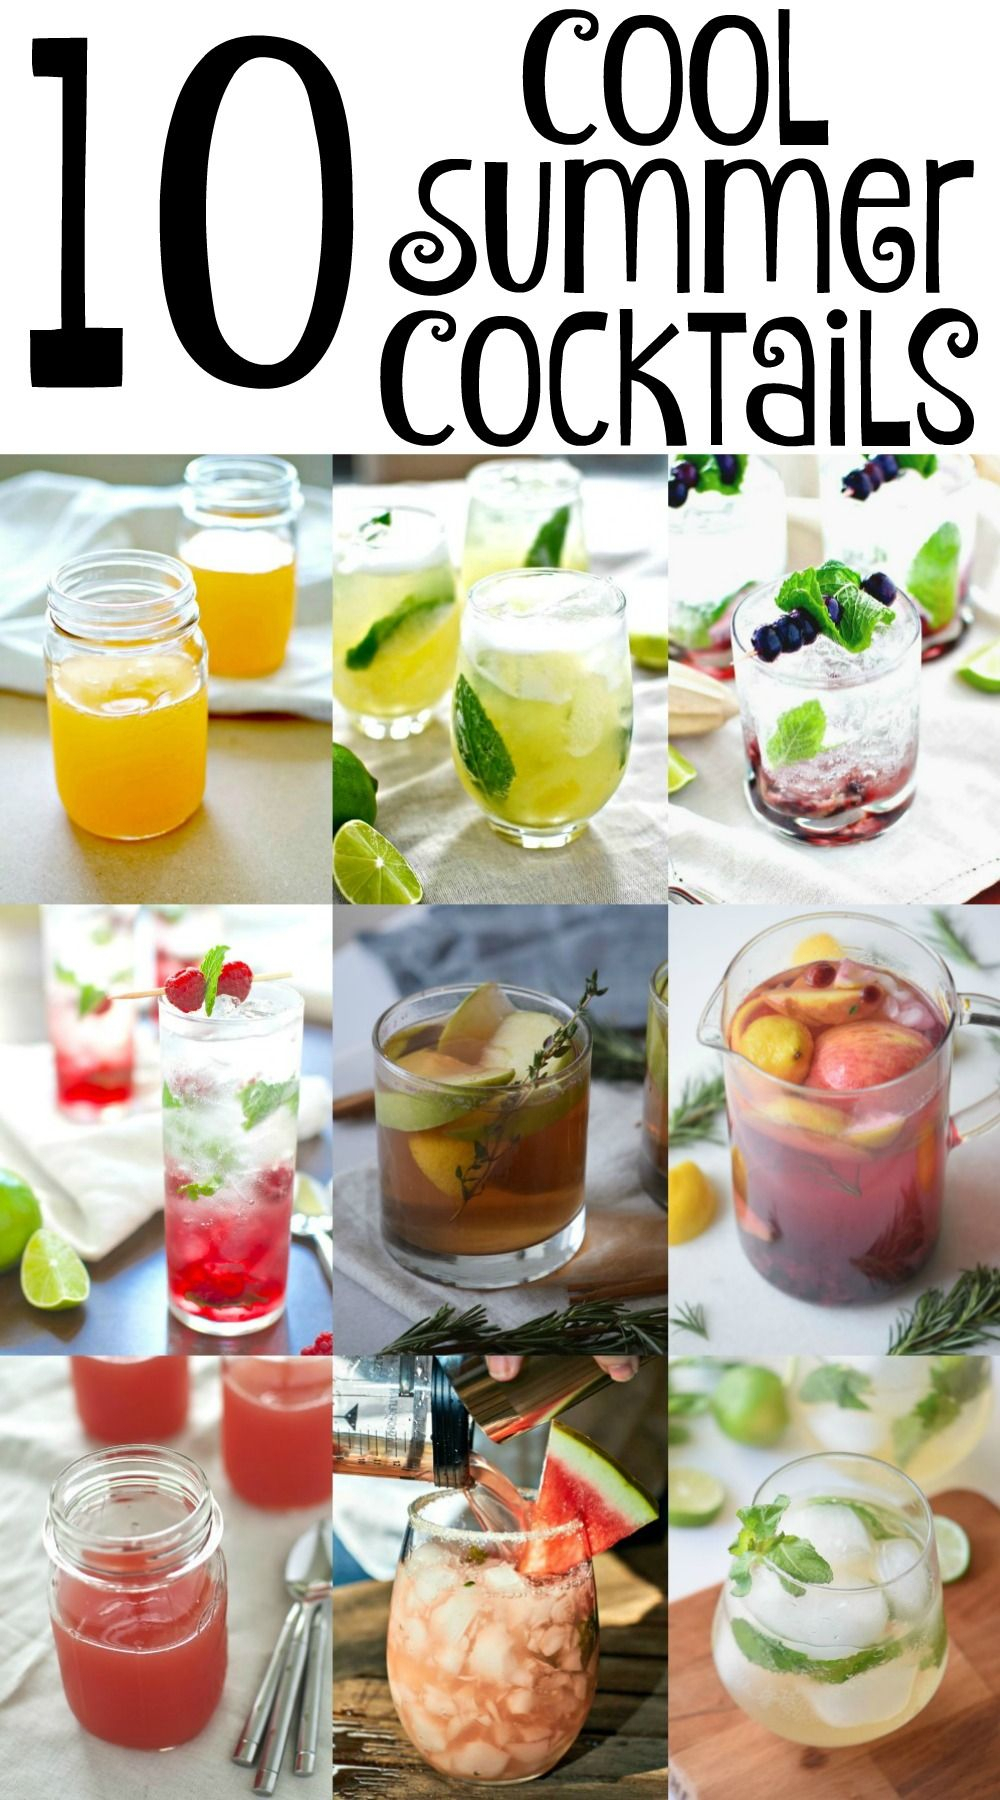 10 Lovely Cool Drink Ideas For Parties 10 cool summer cocktails alcoholic beverages drinks pinterest 2022